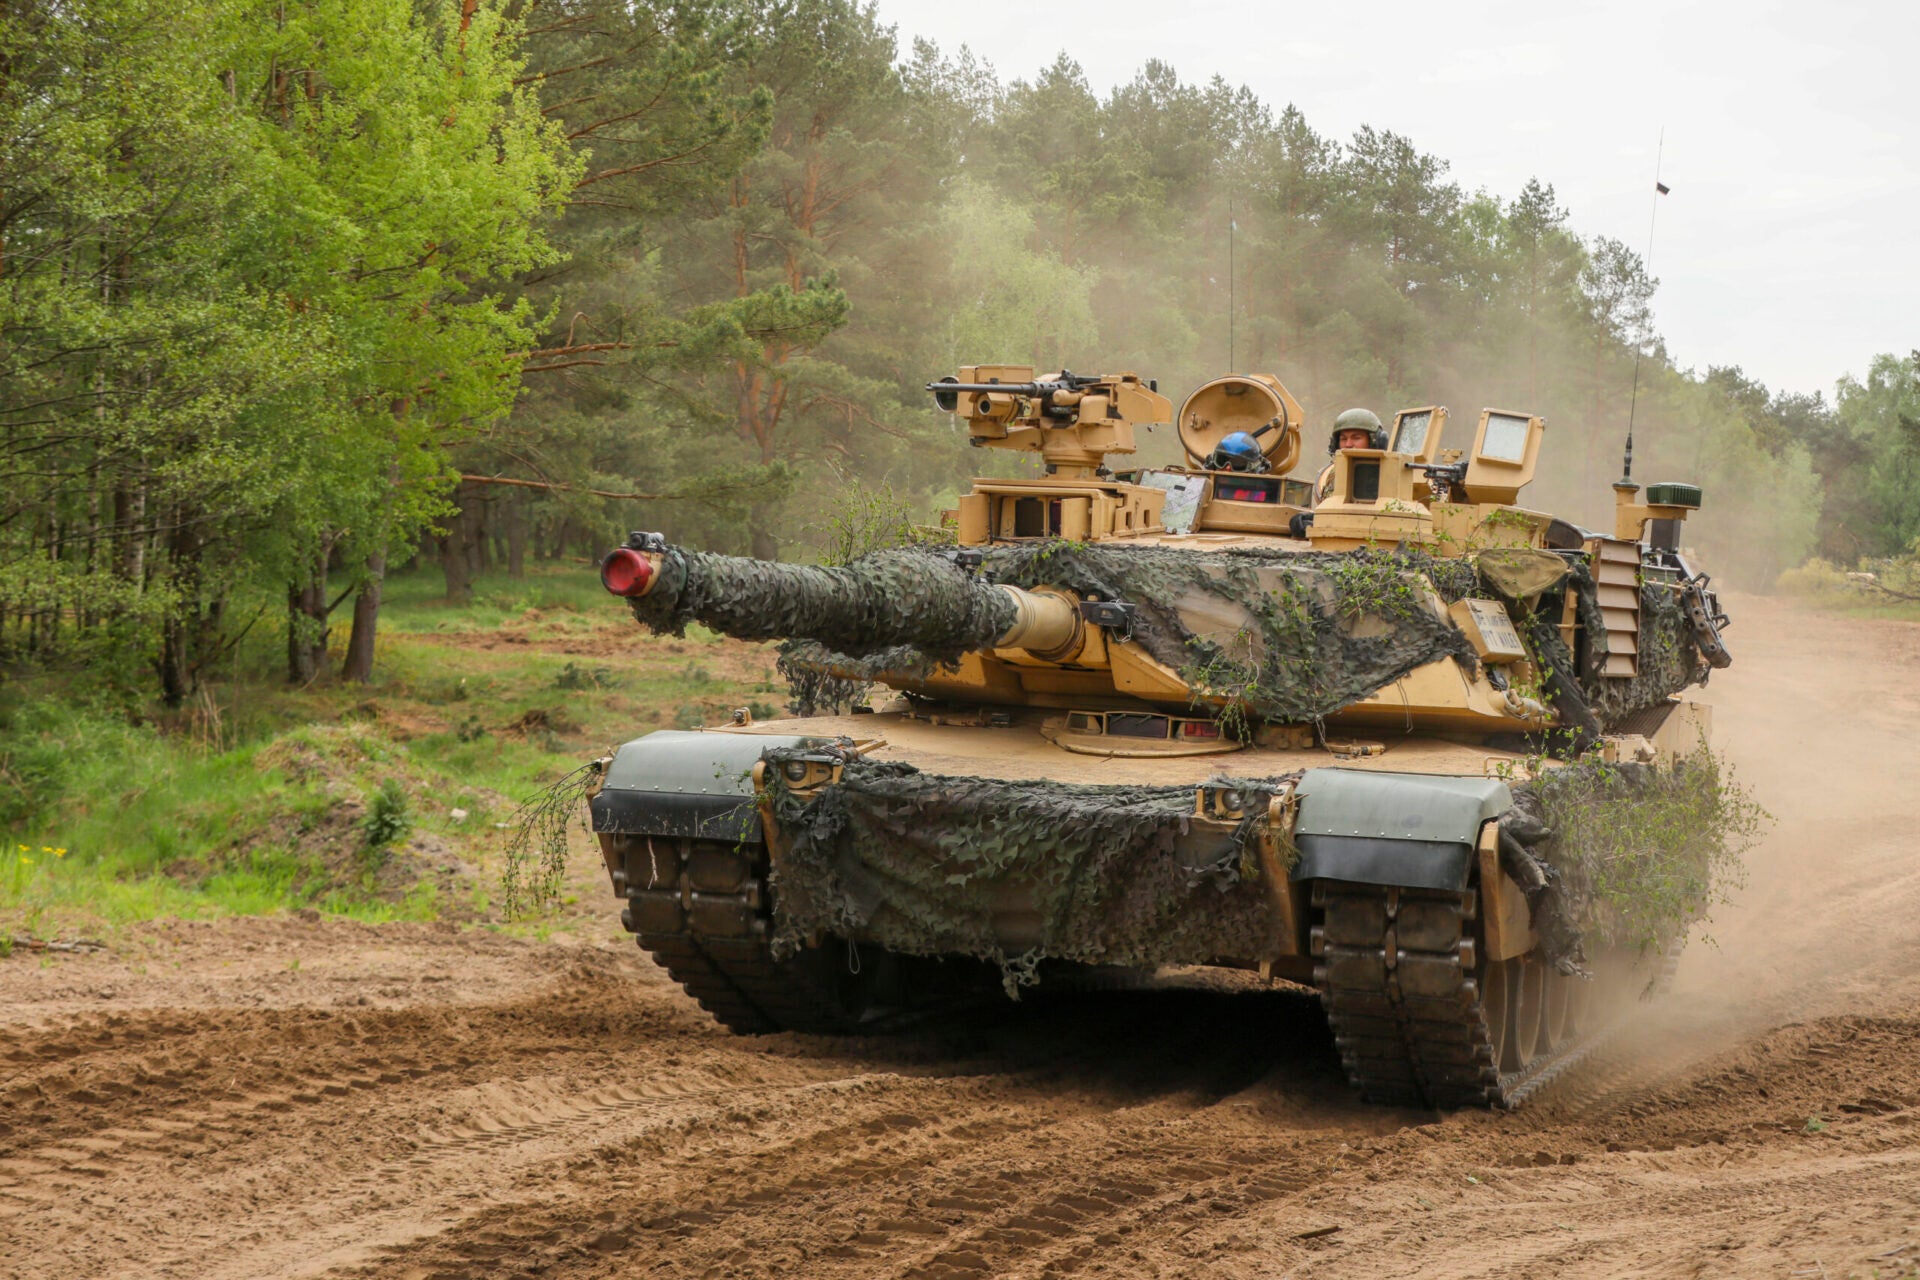 U.S. Army Looking To Speed M1 Tank To Poland